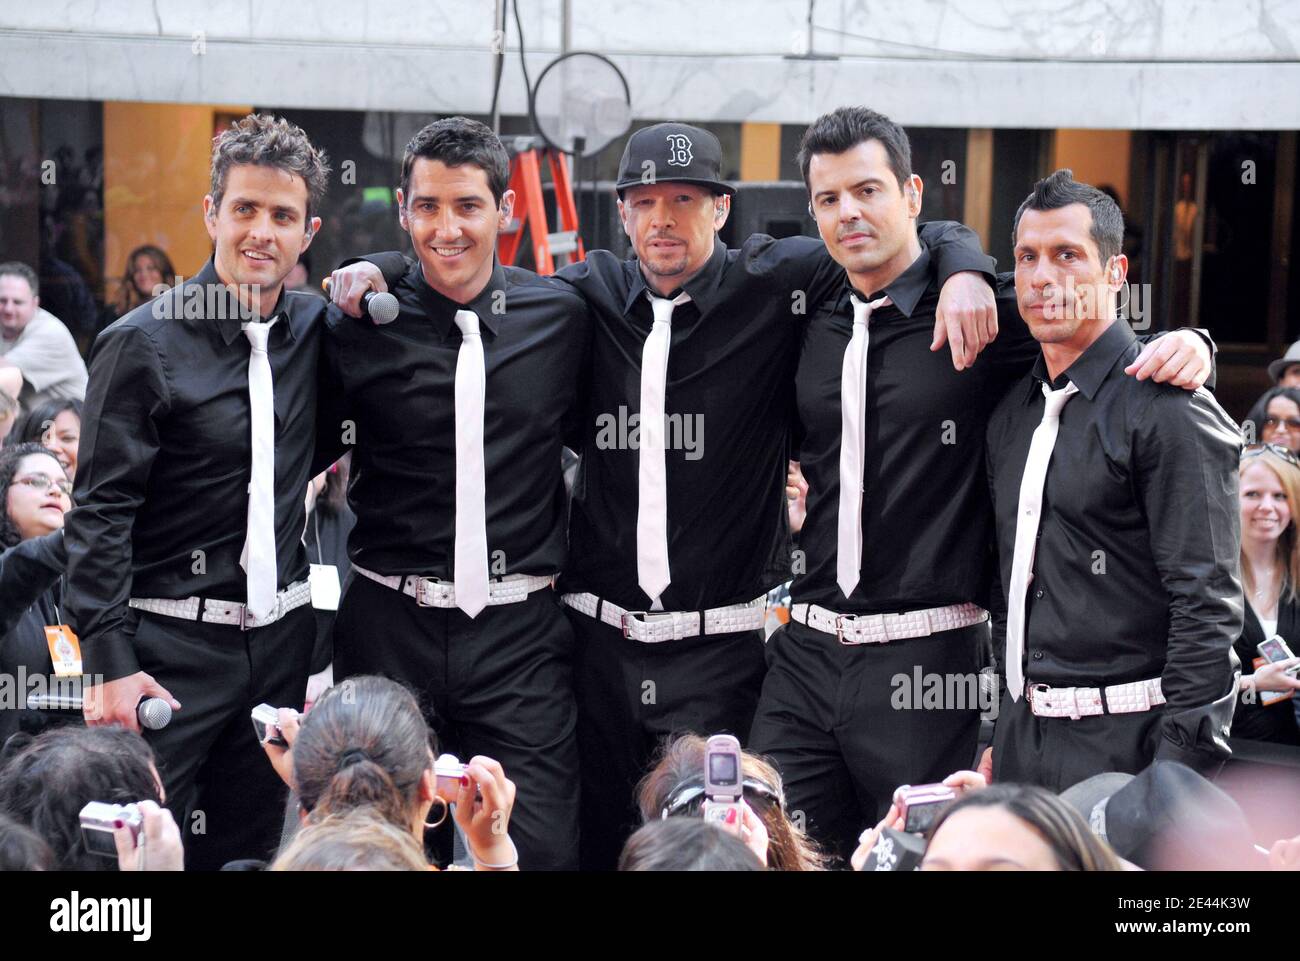 (L-R) Singers Joey McIntyre, Jonathan Knight, Donnie Wahlberg, Jordan Knight and Danny Wood of New Kids On The Block perform on NBC's 'Today' Show Concert Series at Rockefeller Plaza in New York City, NY, USA on May 8, 2009. Photo by Gregorio Binuya/ABACAPRESS.COM (Pictured: Joey McIntyre, Jonathan Knight, Donnie Wahlberg, Jordan Knight, Danny Wood, New Kids On The Block) Stock Photo